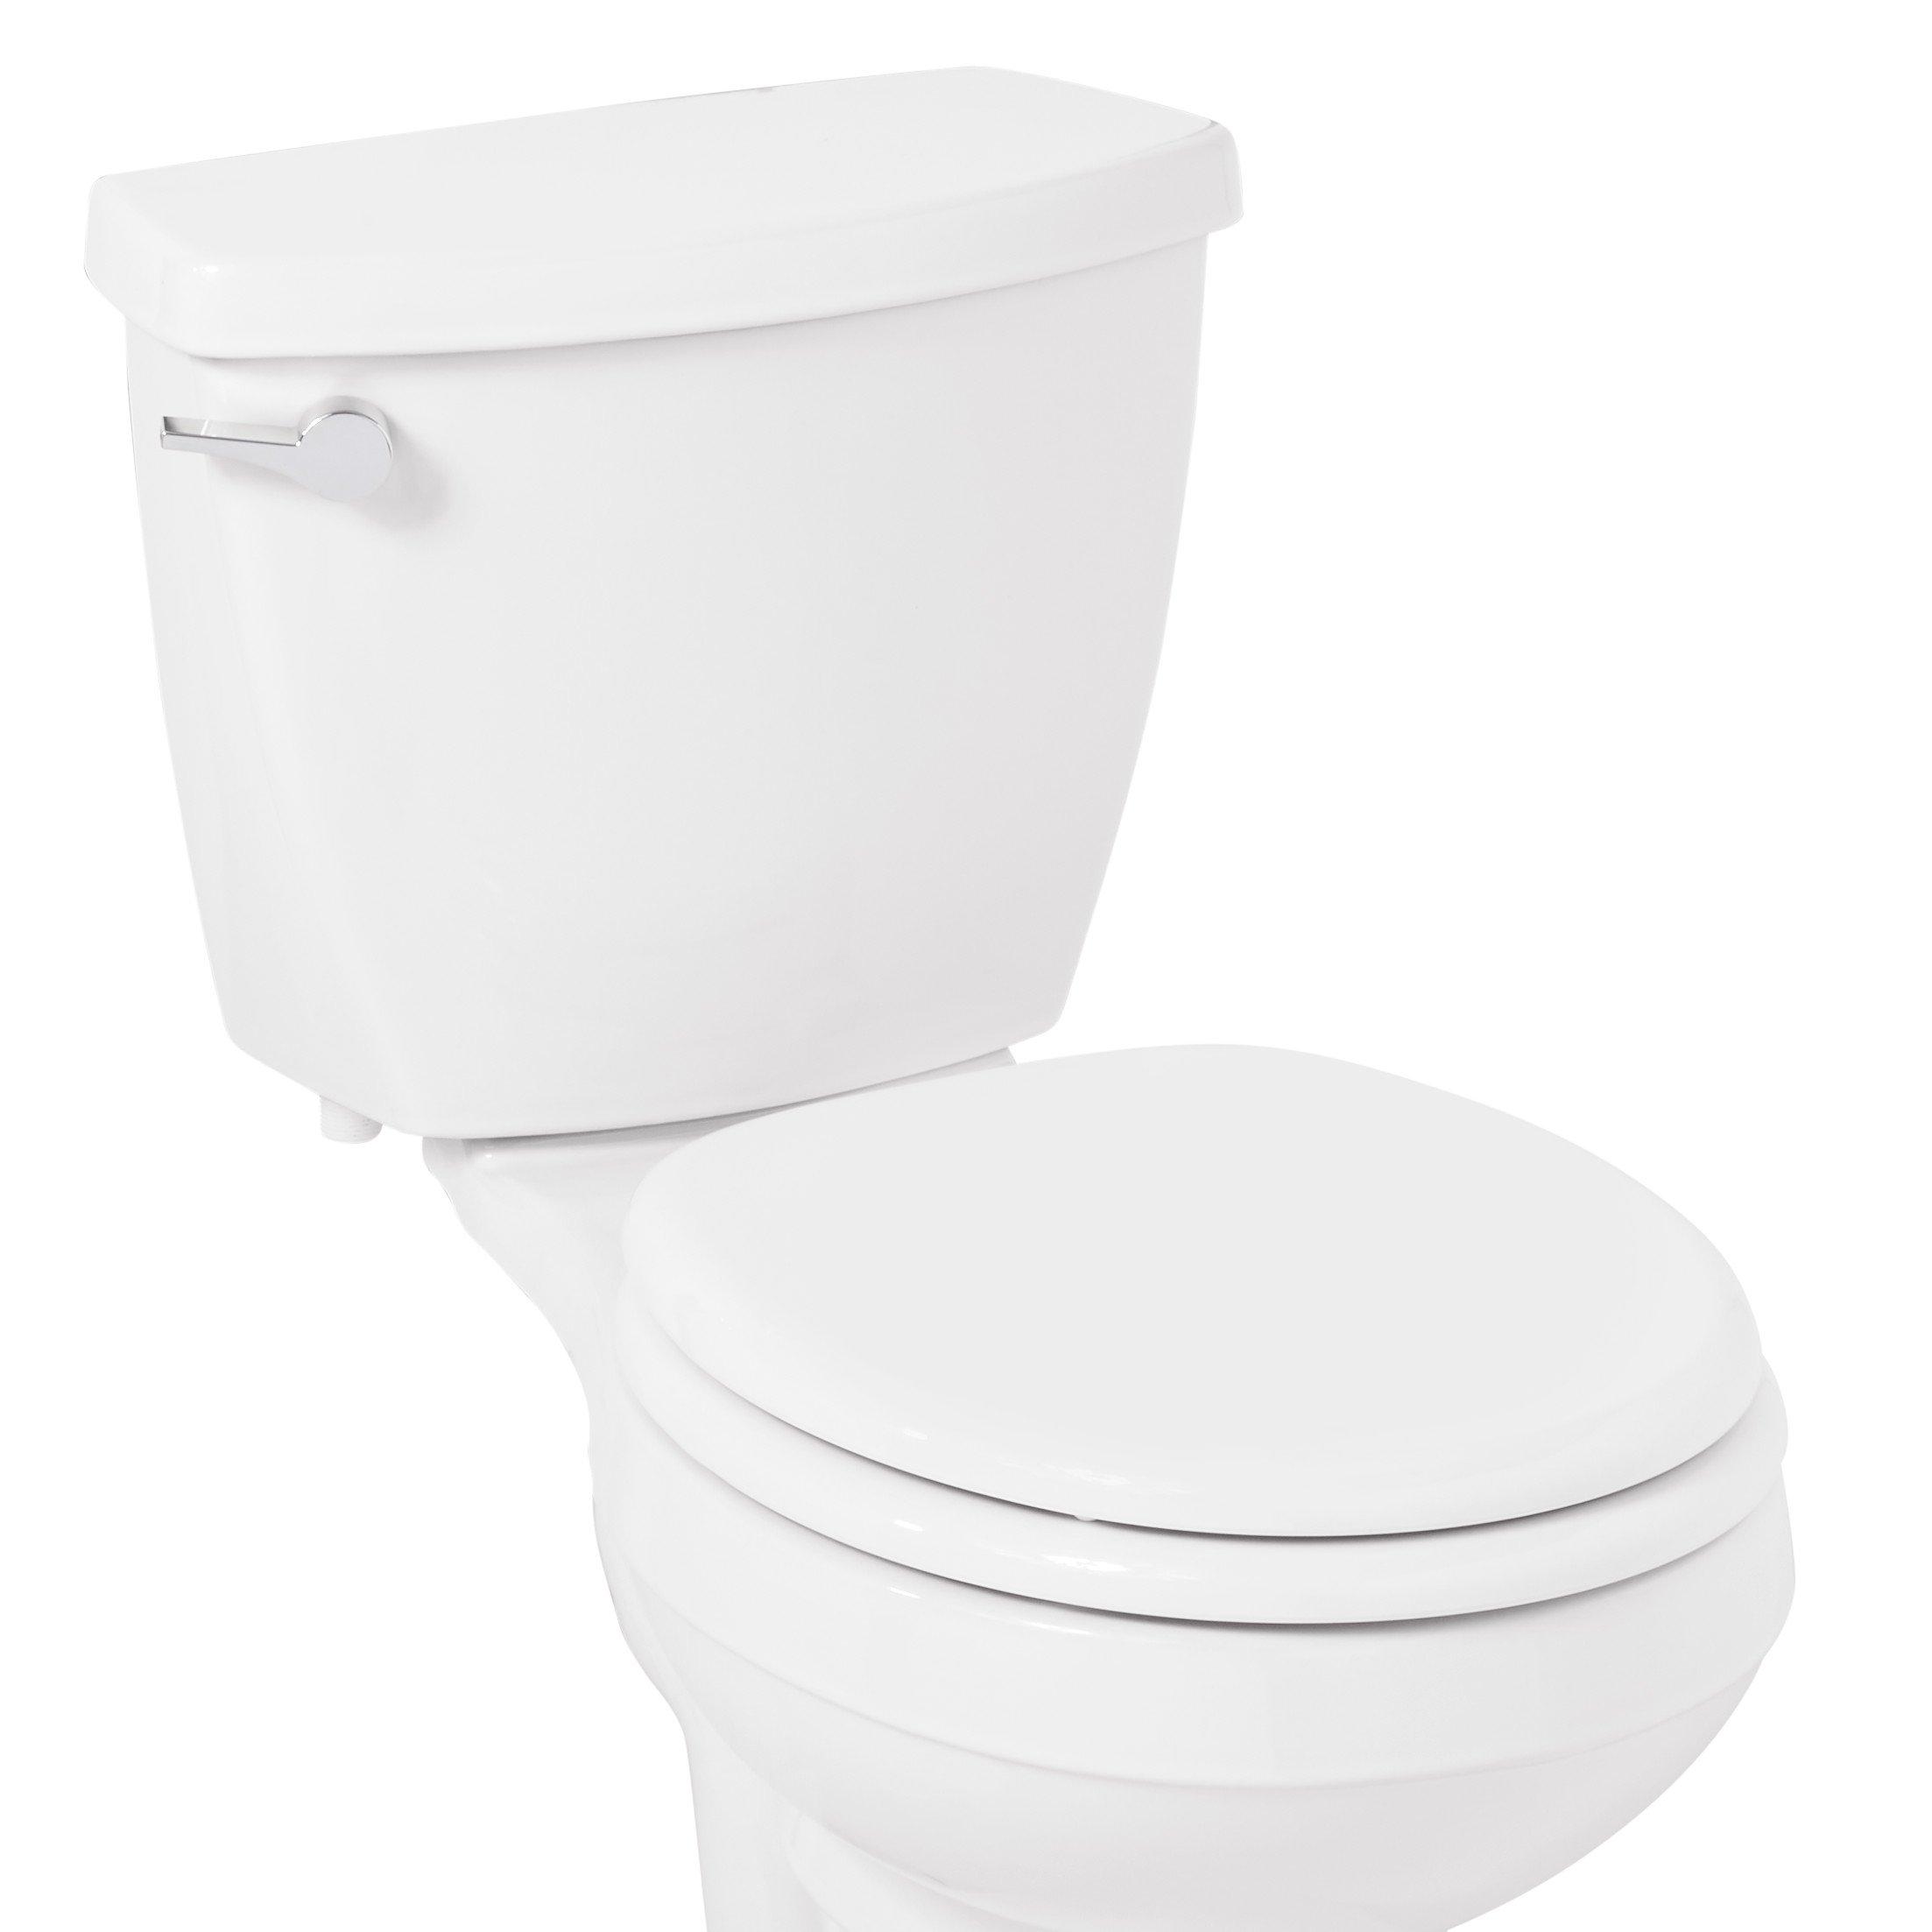 Bath Decor 2F1R7-00 Deluxe Slow Close Round Top Mount Adjustable Release  and Clean Hinge Toilet Seat, White - キッチン